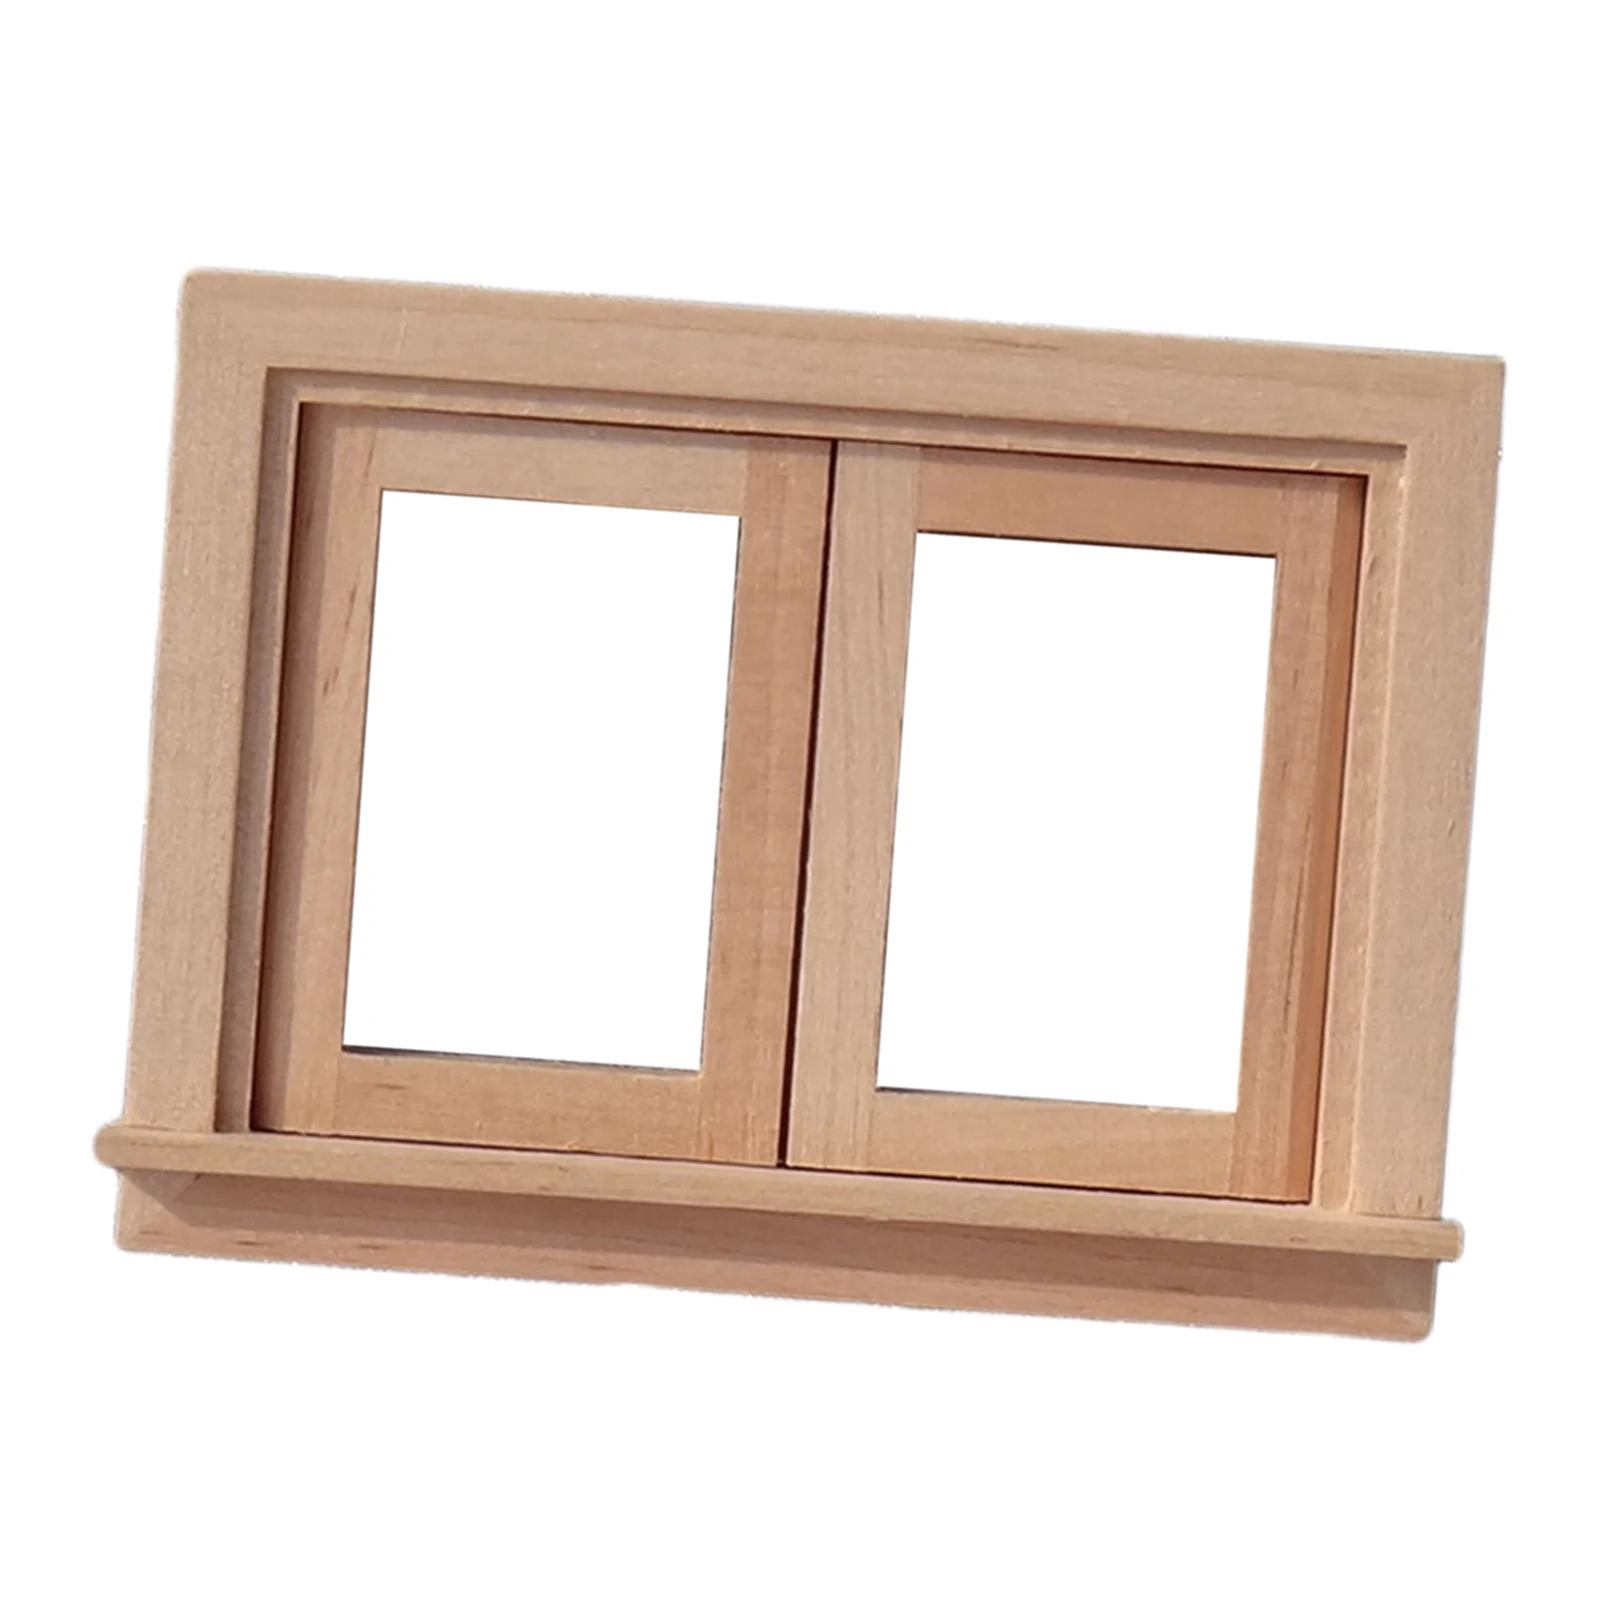 12th Window Frames for Dollhouse Room House Accessories Kids Pretend Toys